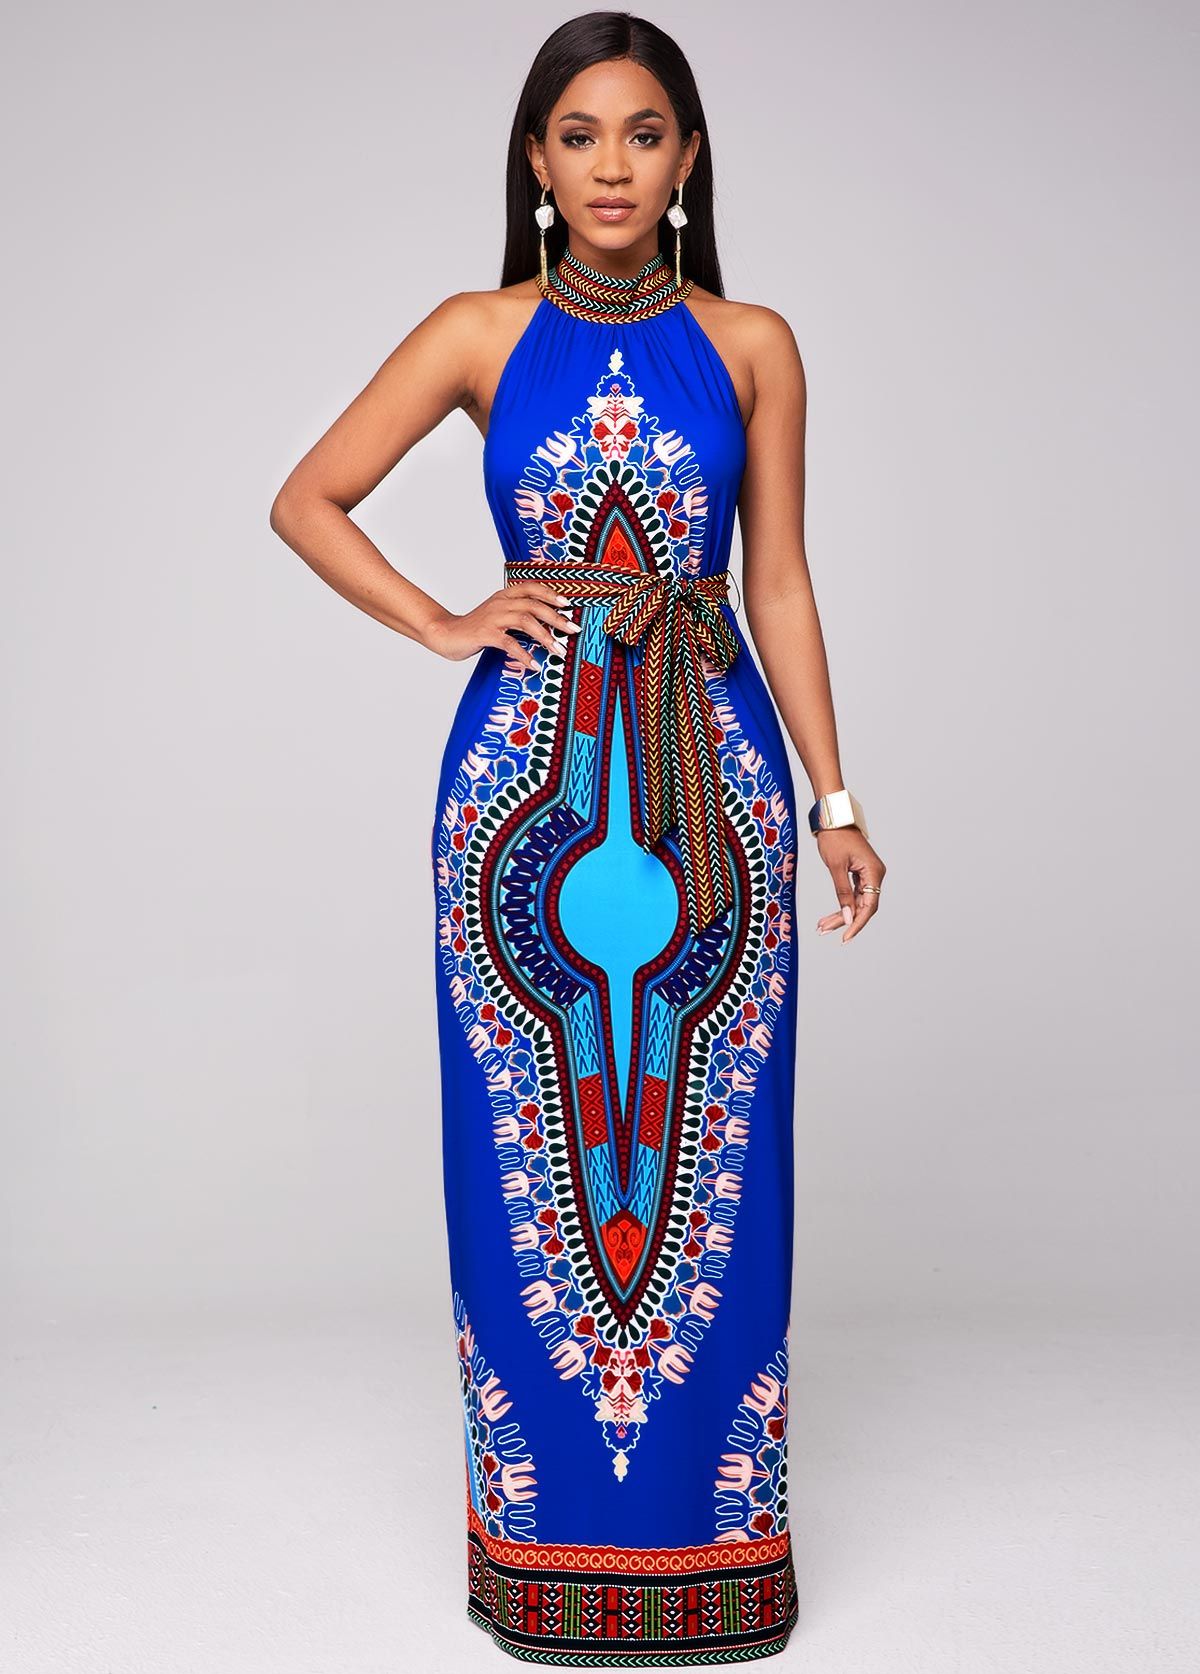 Cute Maasai tribal pattern dresses for an evening party